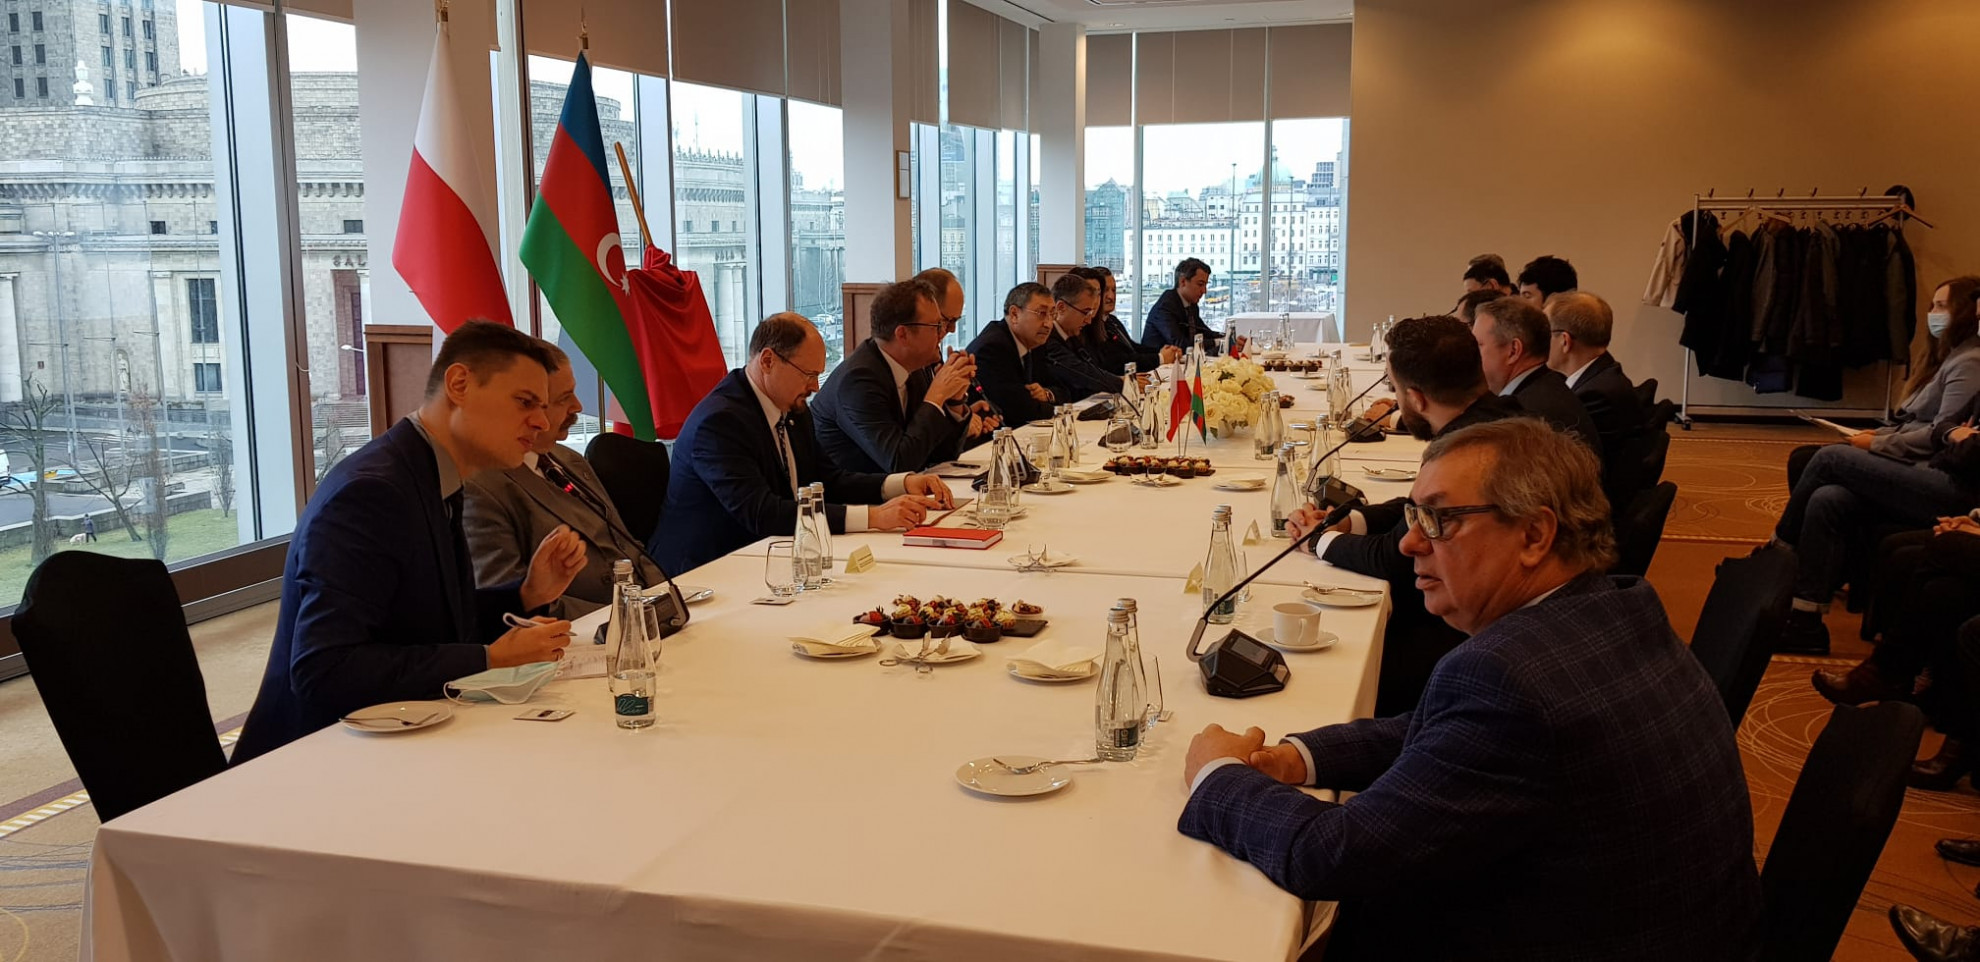 The 30th anniversary of Azerbaijan-Poland diplomatic relations was marked in Warsaw